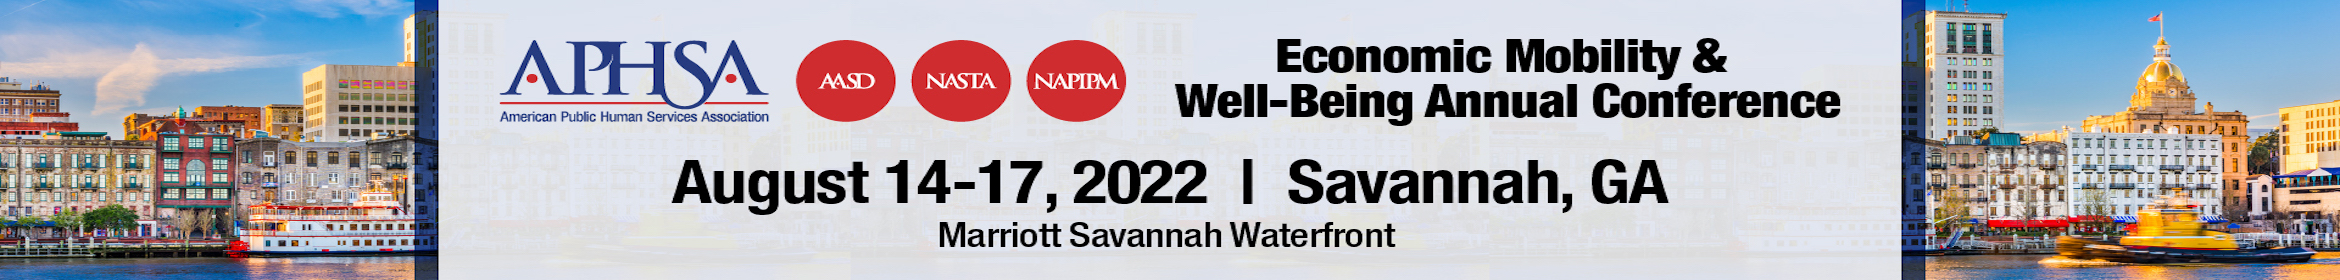 Economic Mobility & Well-Being Conference 2022 Main banner